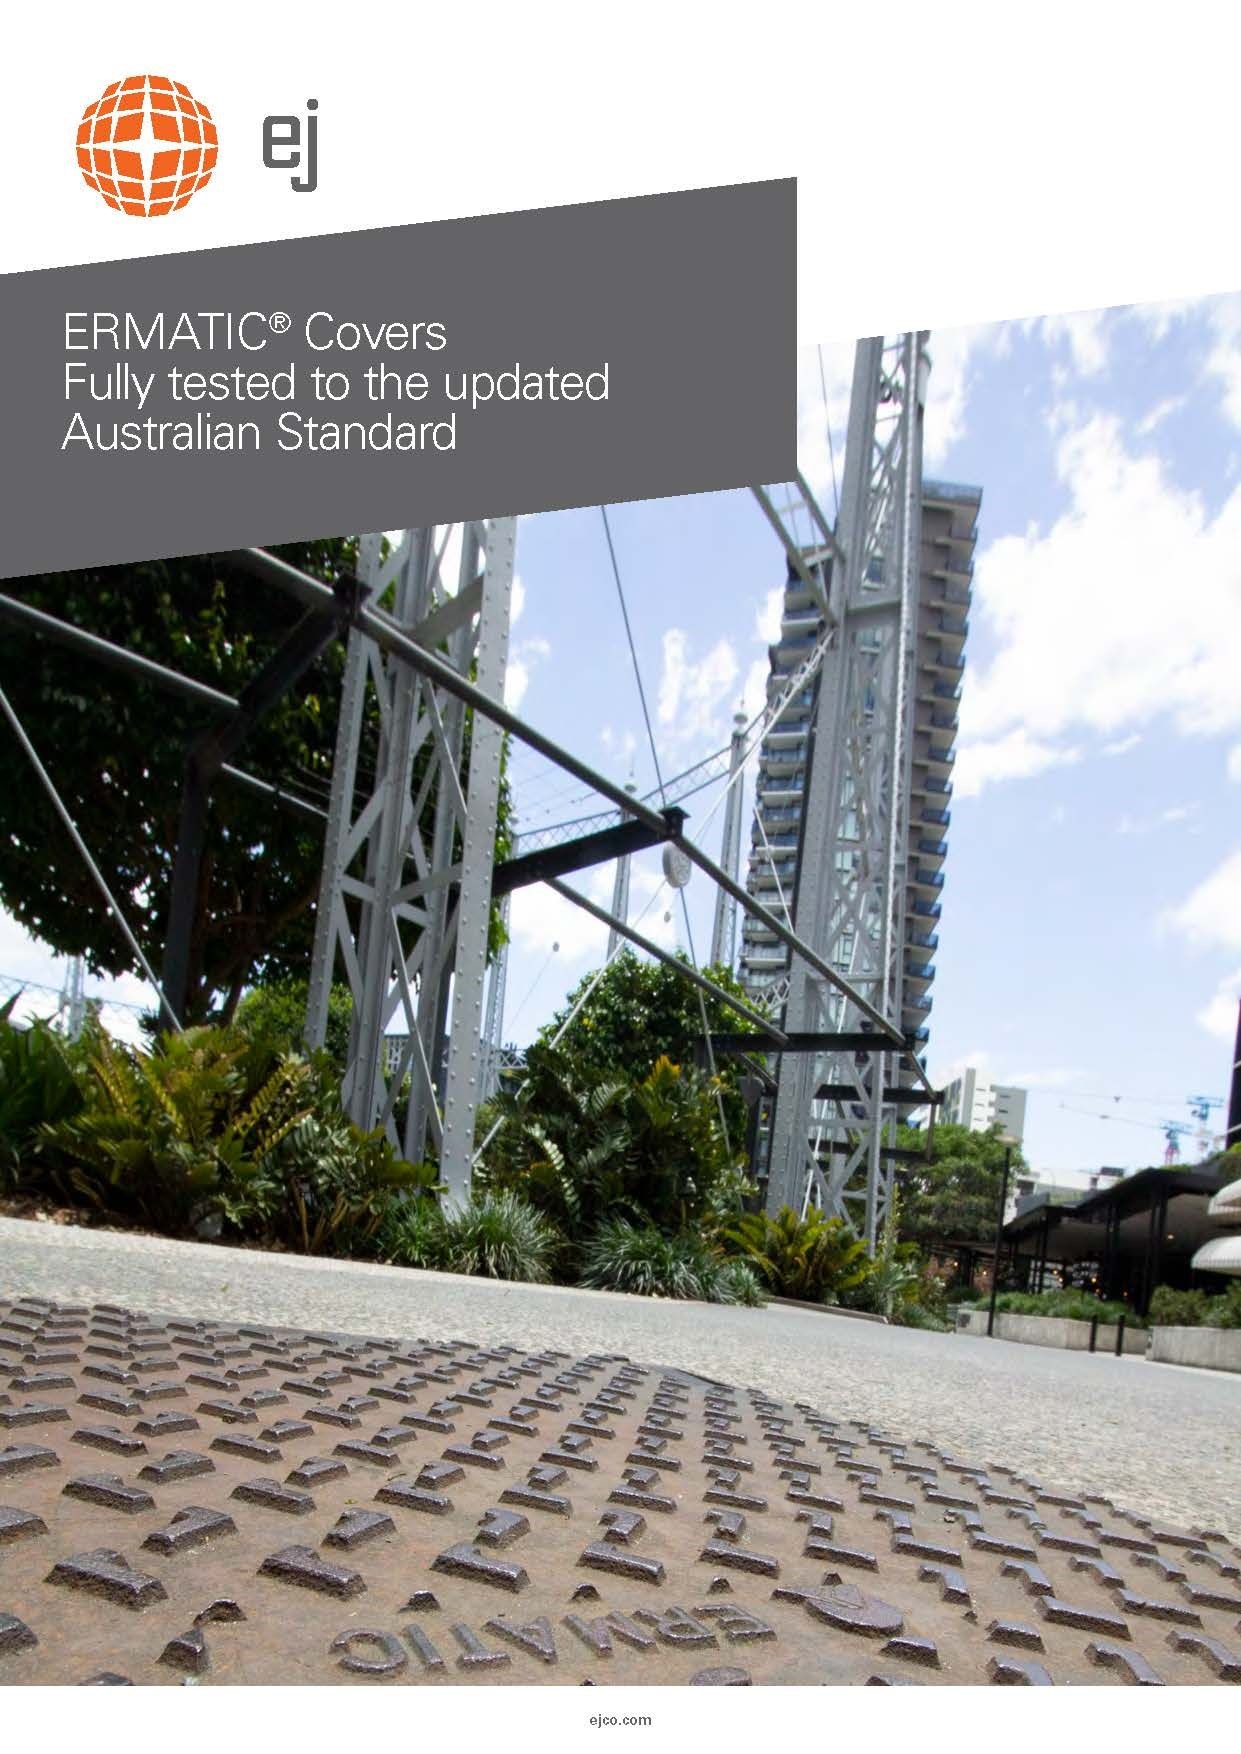 ERMATIC® Covers Catalogue Making It Easy for EJ Customers